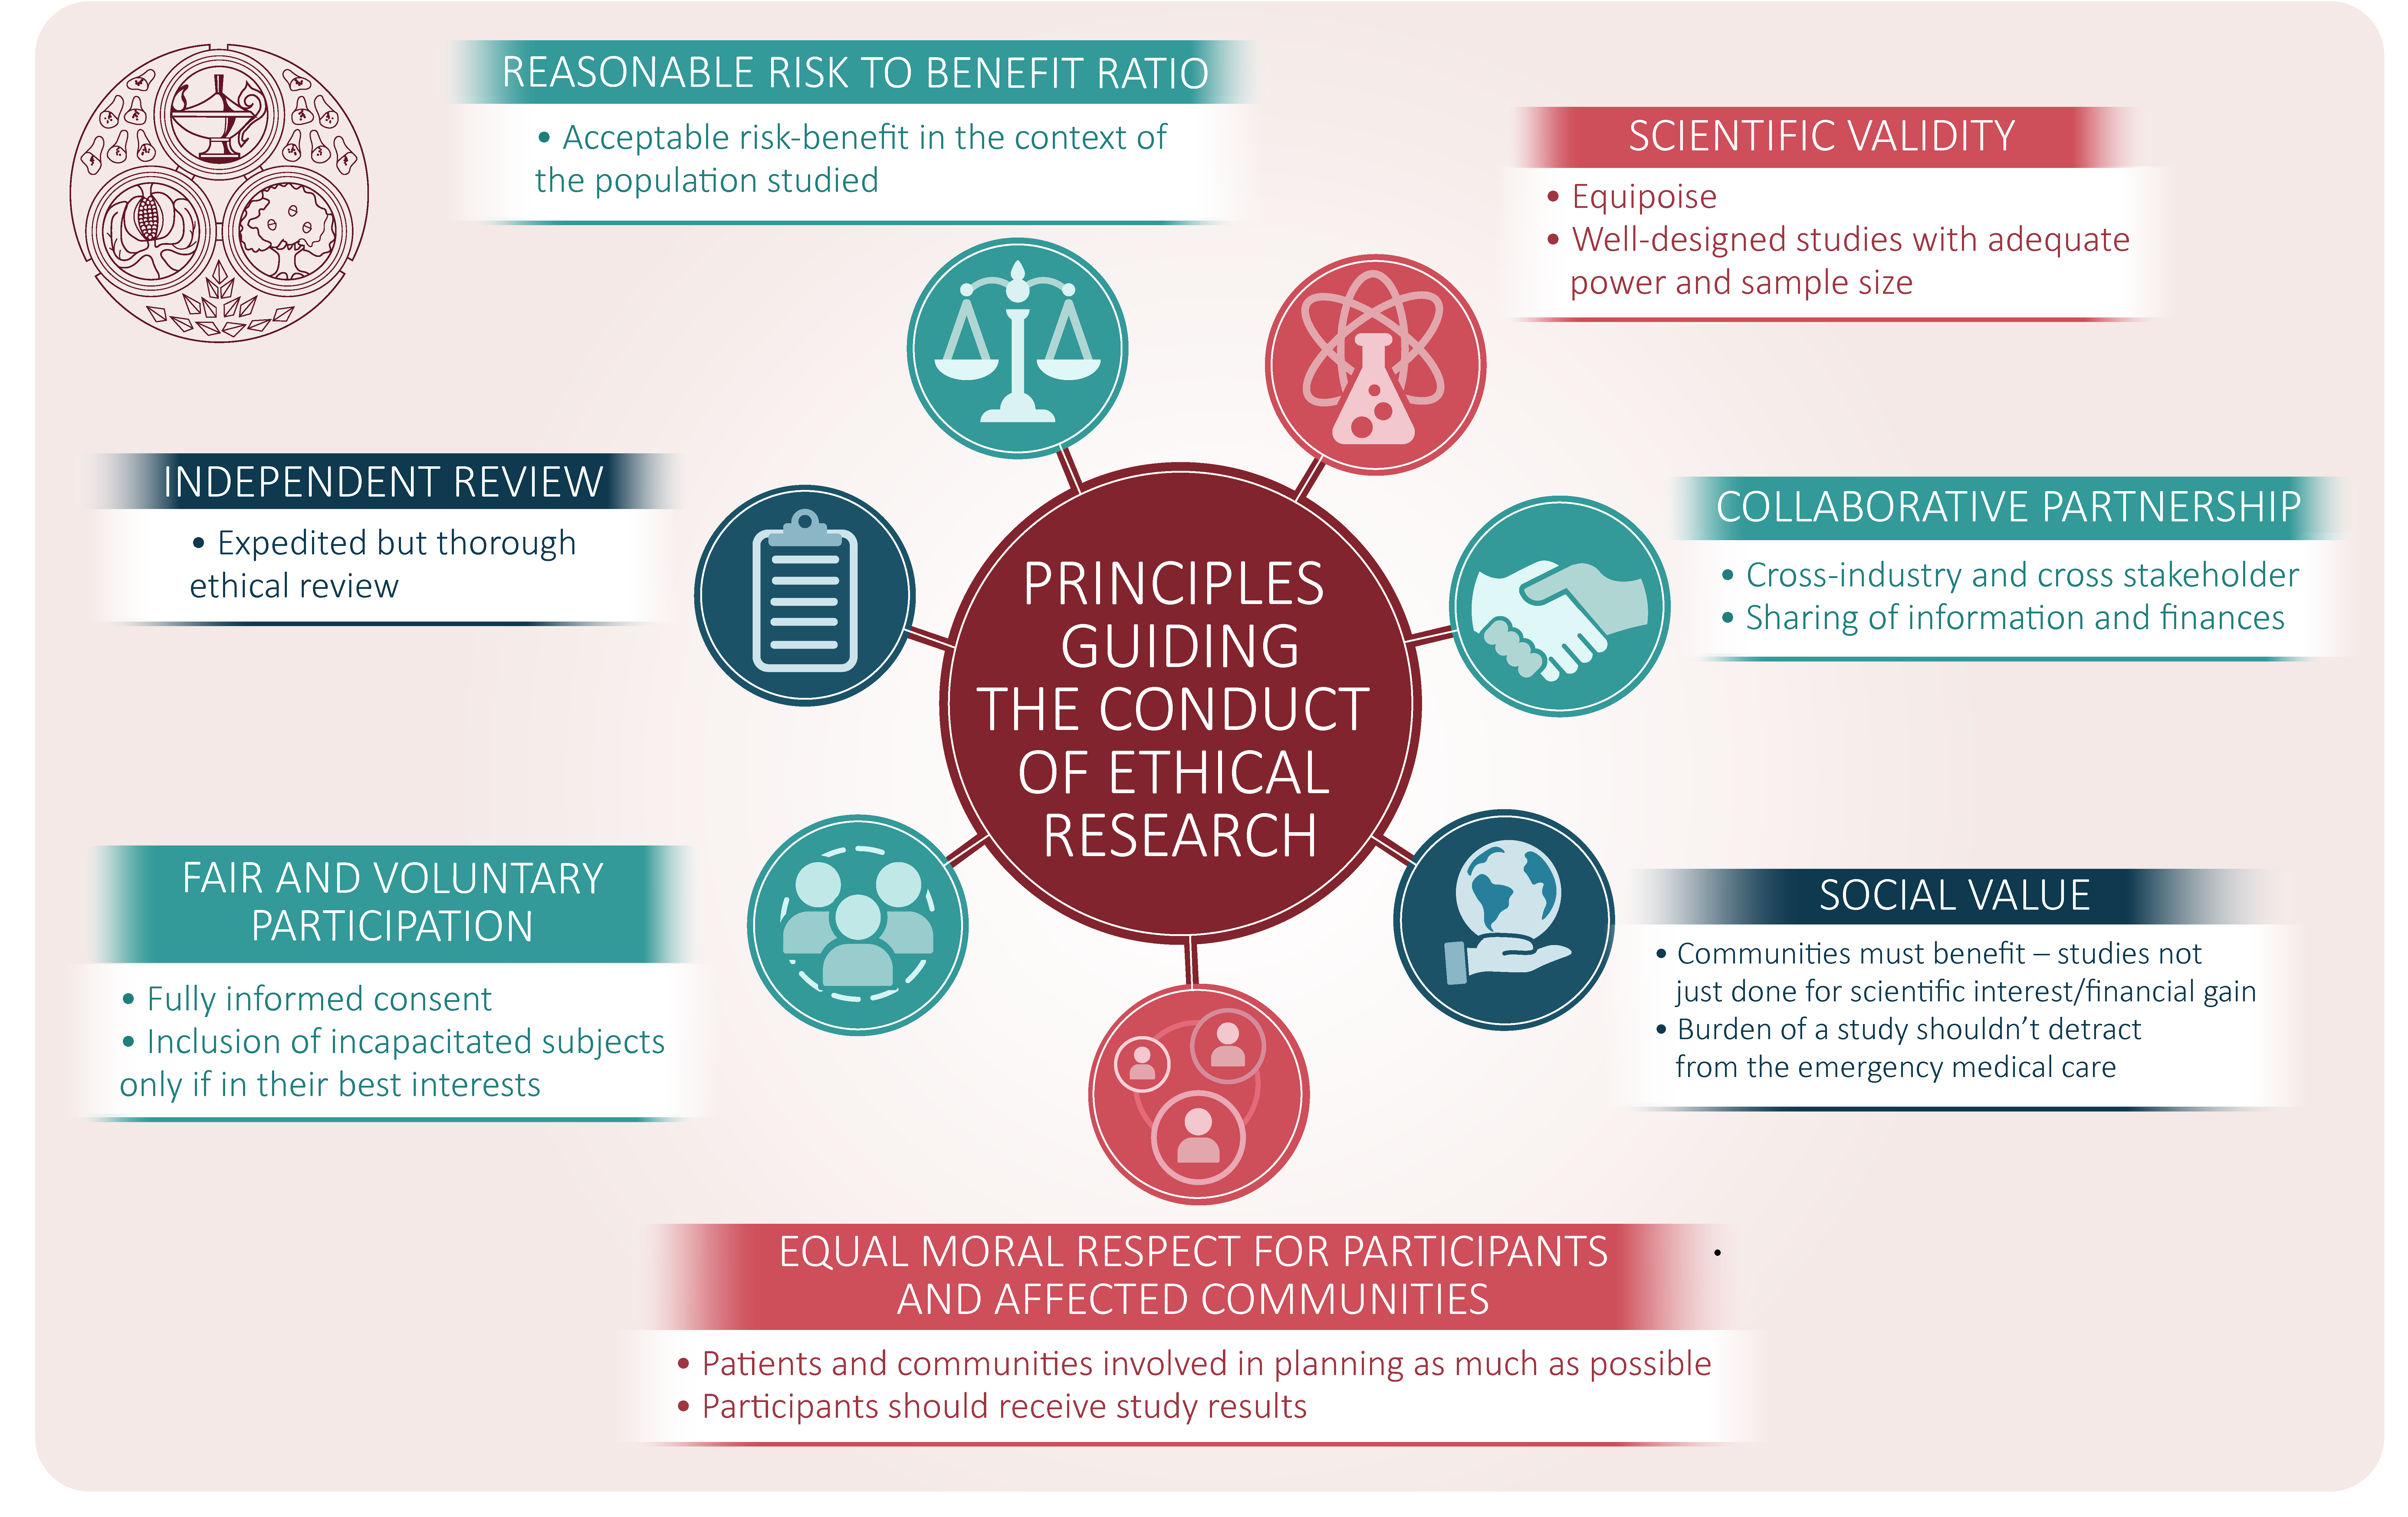 justice ethical principle example